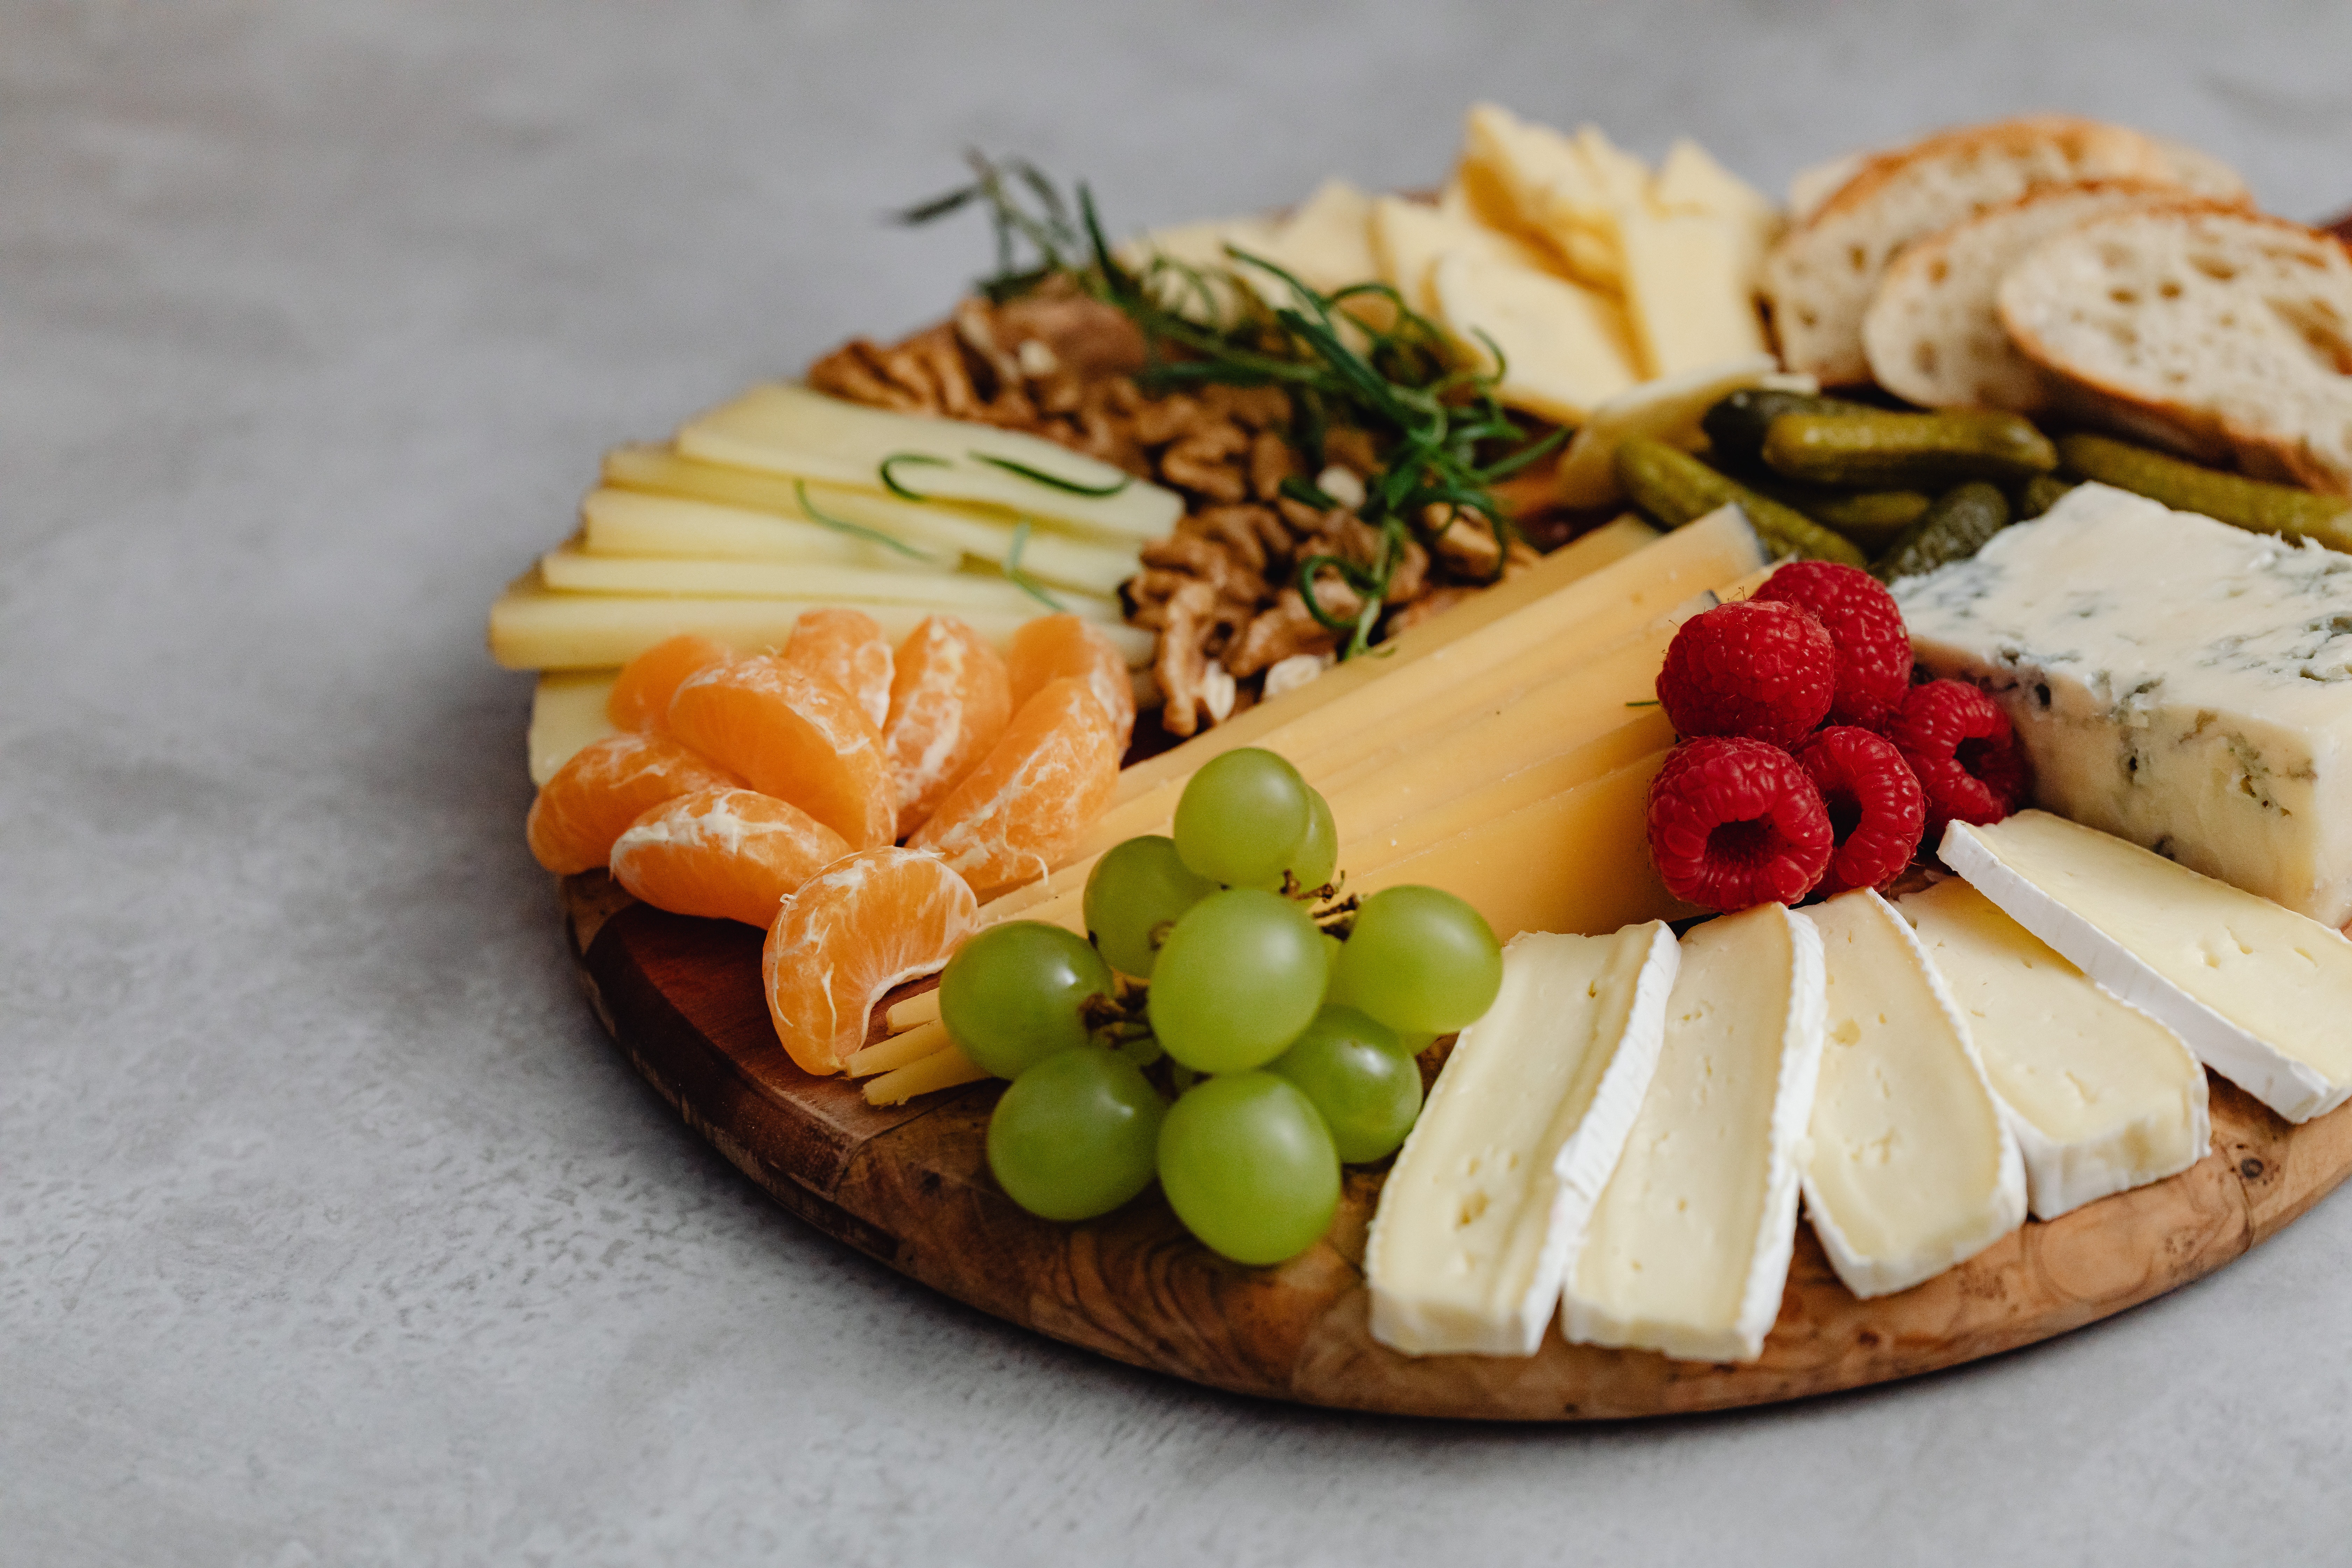 A Charcuterie Board from Buddig